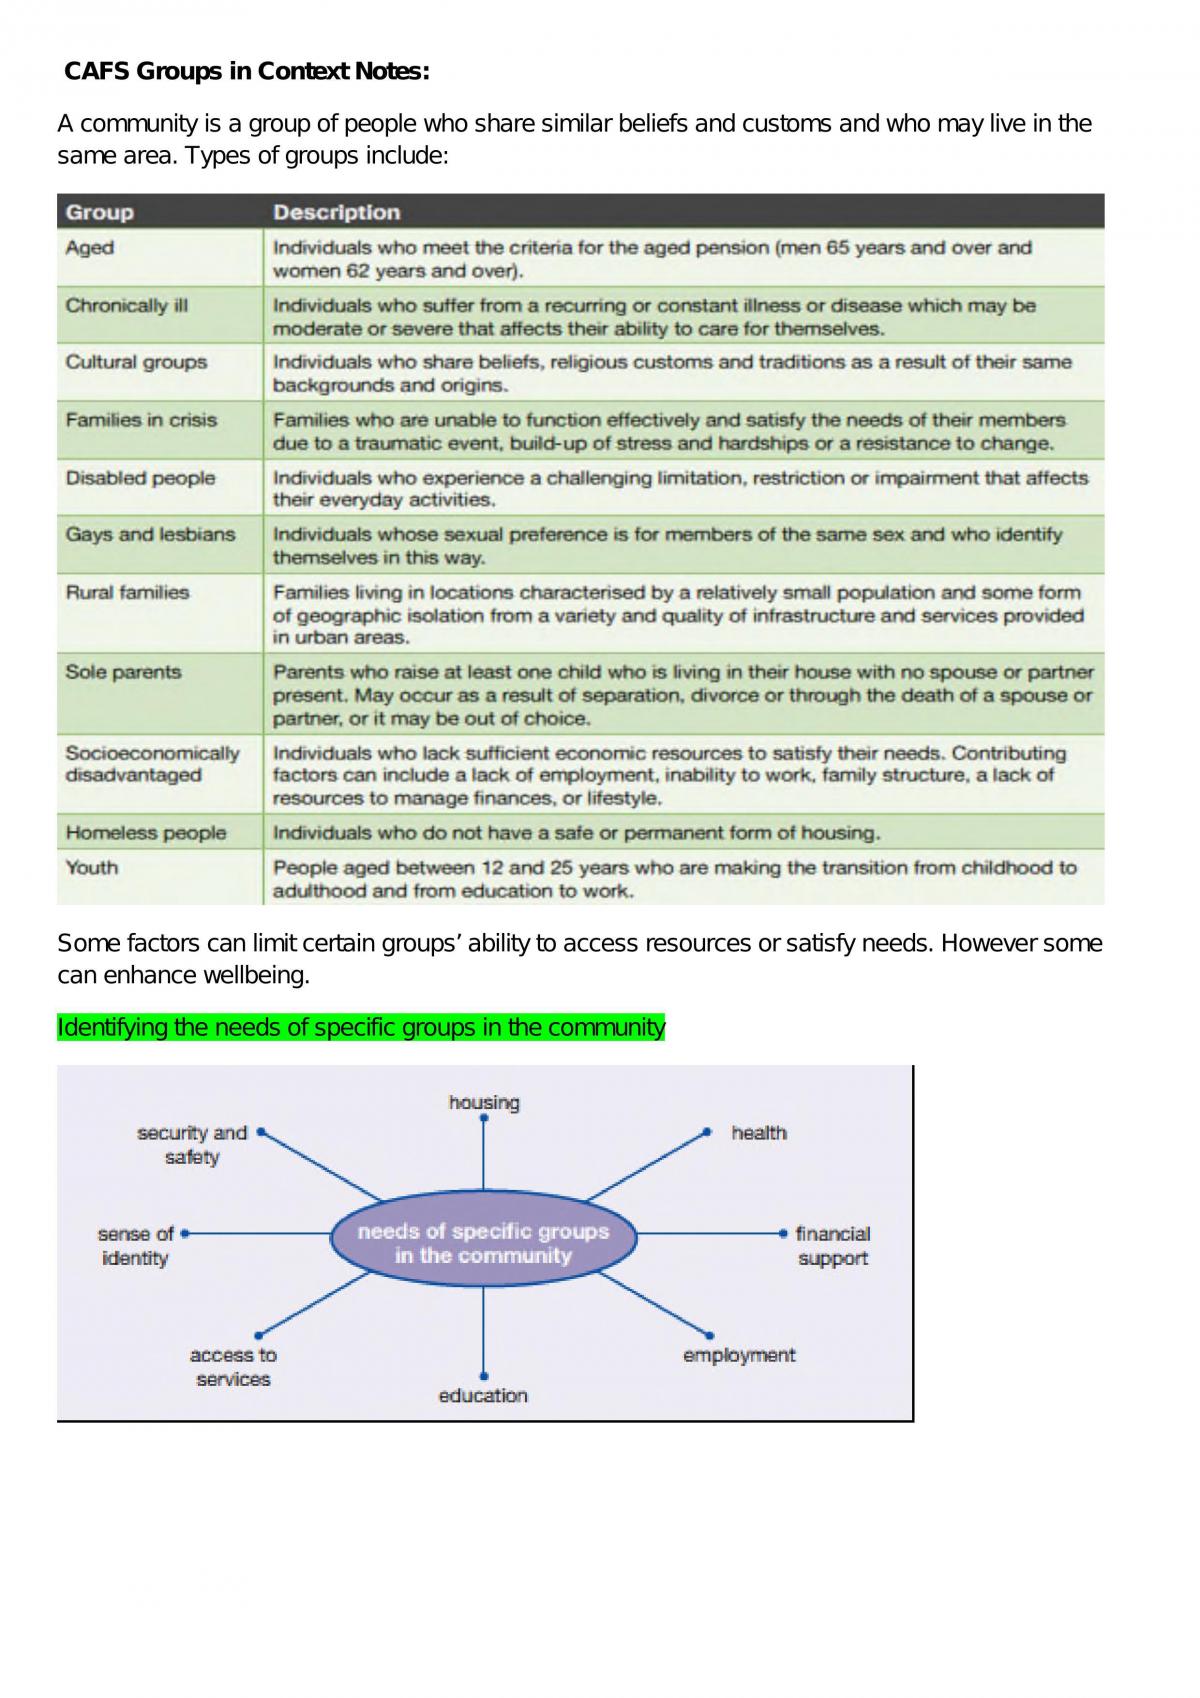 Community and Family Study Groups in context Notes (3 groups) - Page 1